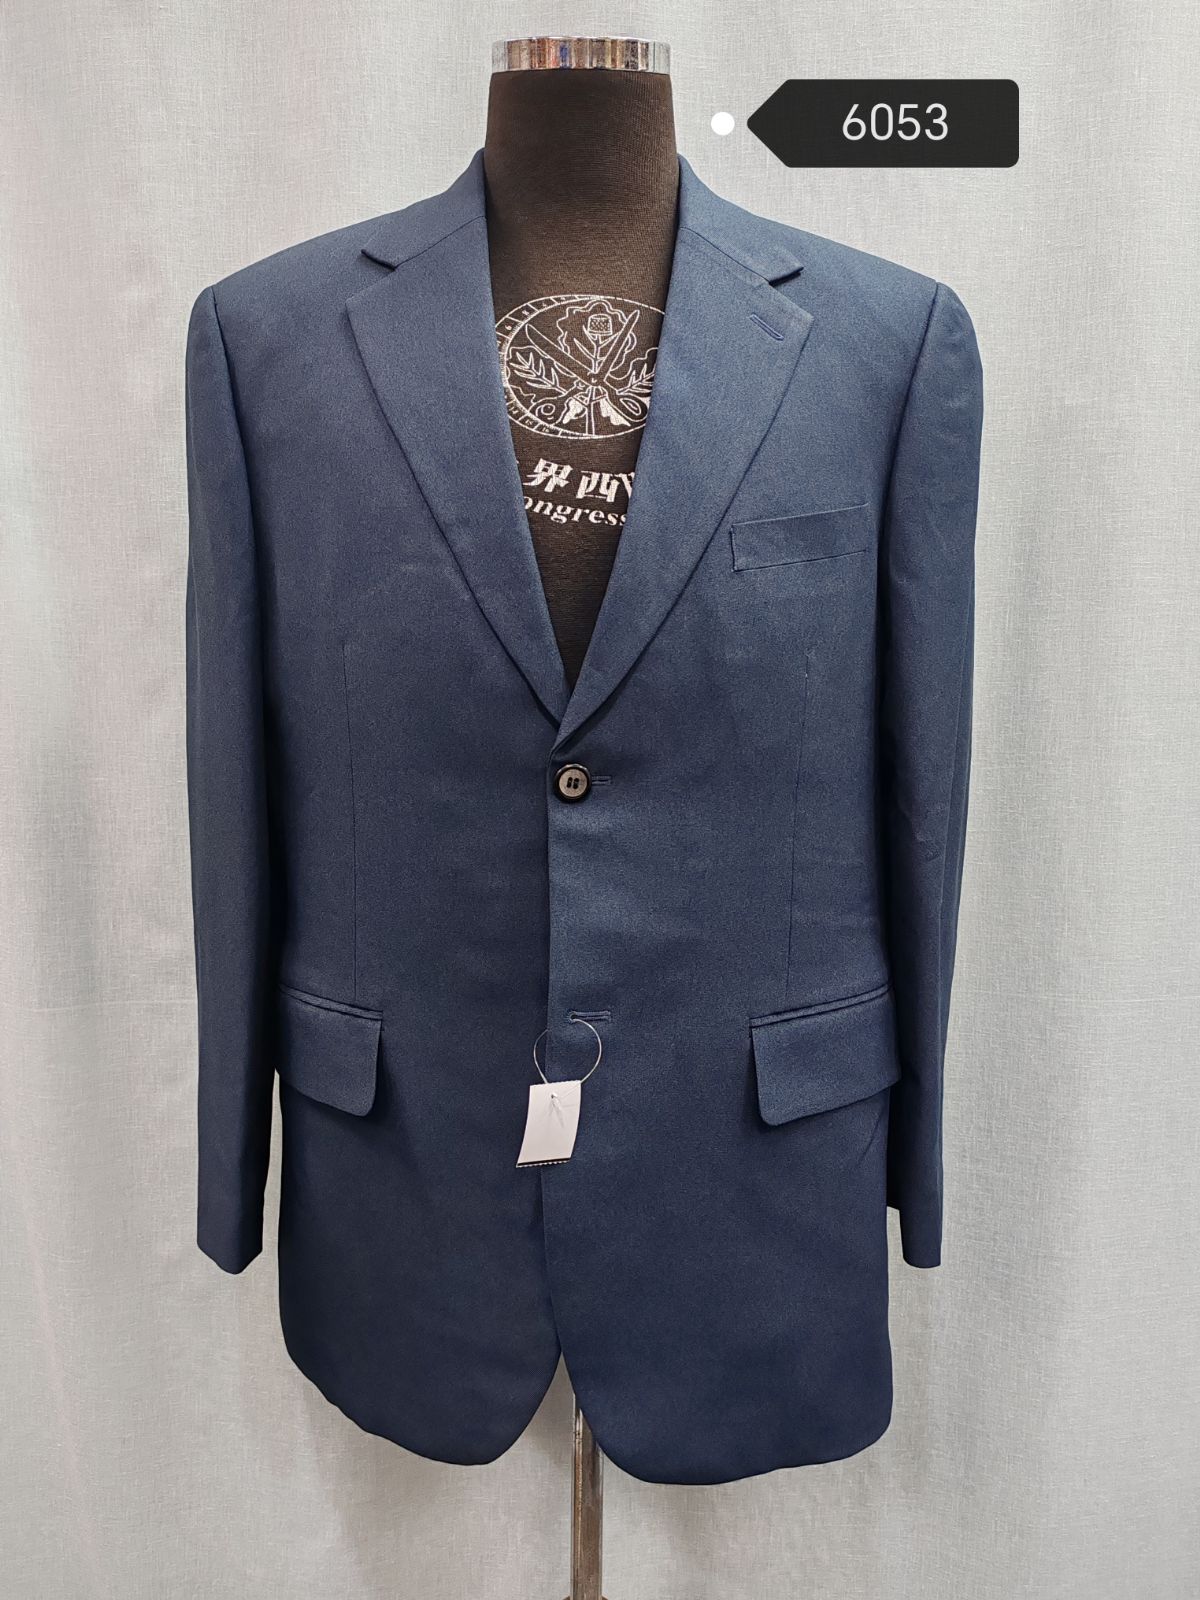 *6053* Readymade Suits for Sales